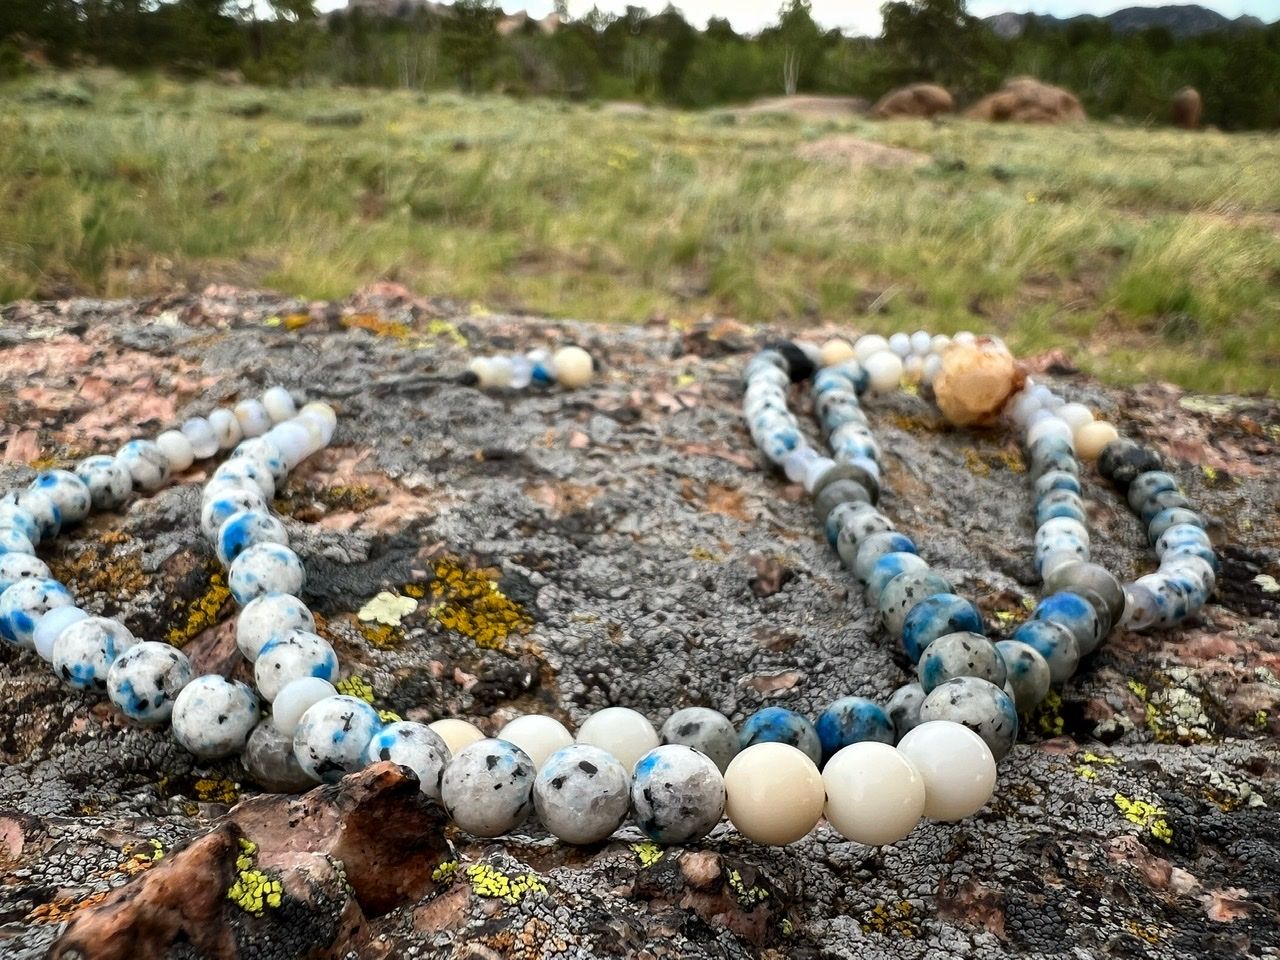 Blue, white, cream and pale yellow Stone and crystal necklace laying on a lichen covered rock